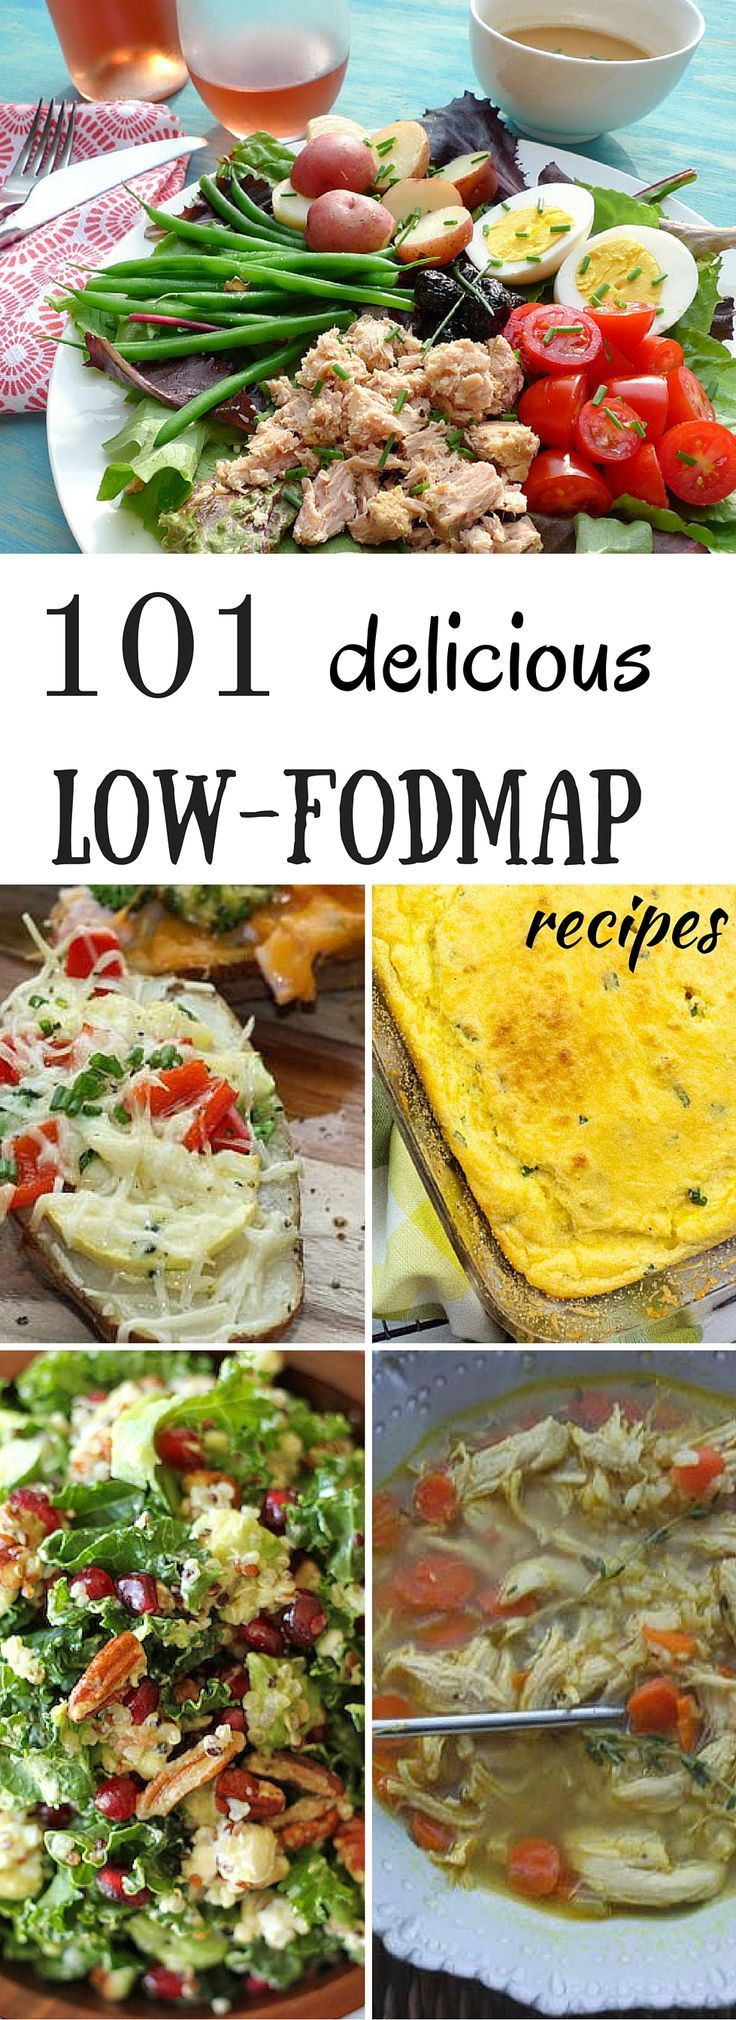 Low Fodmap Dinner Recipes
 69 best images about Low FodMap Recipes on Pinterest